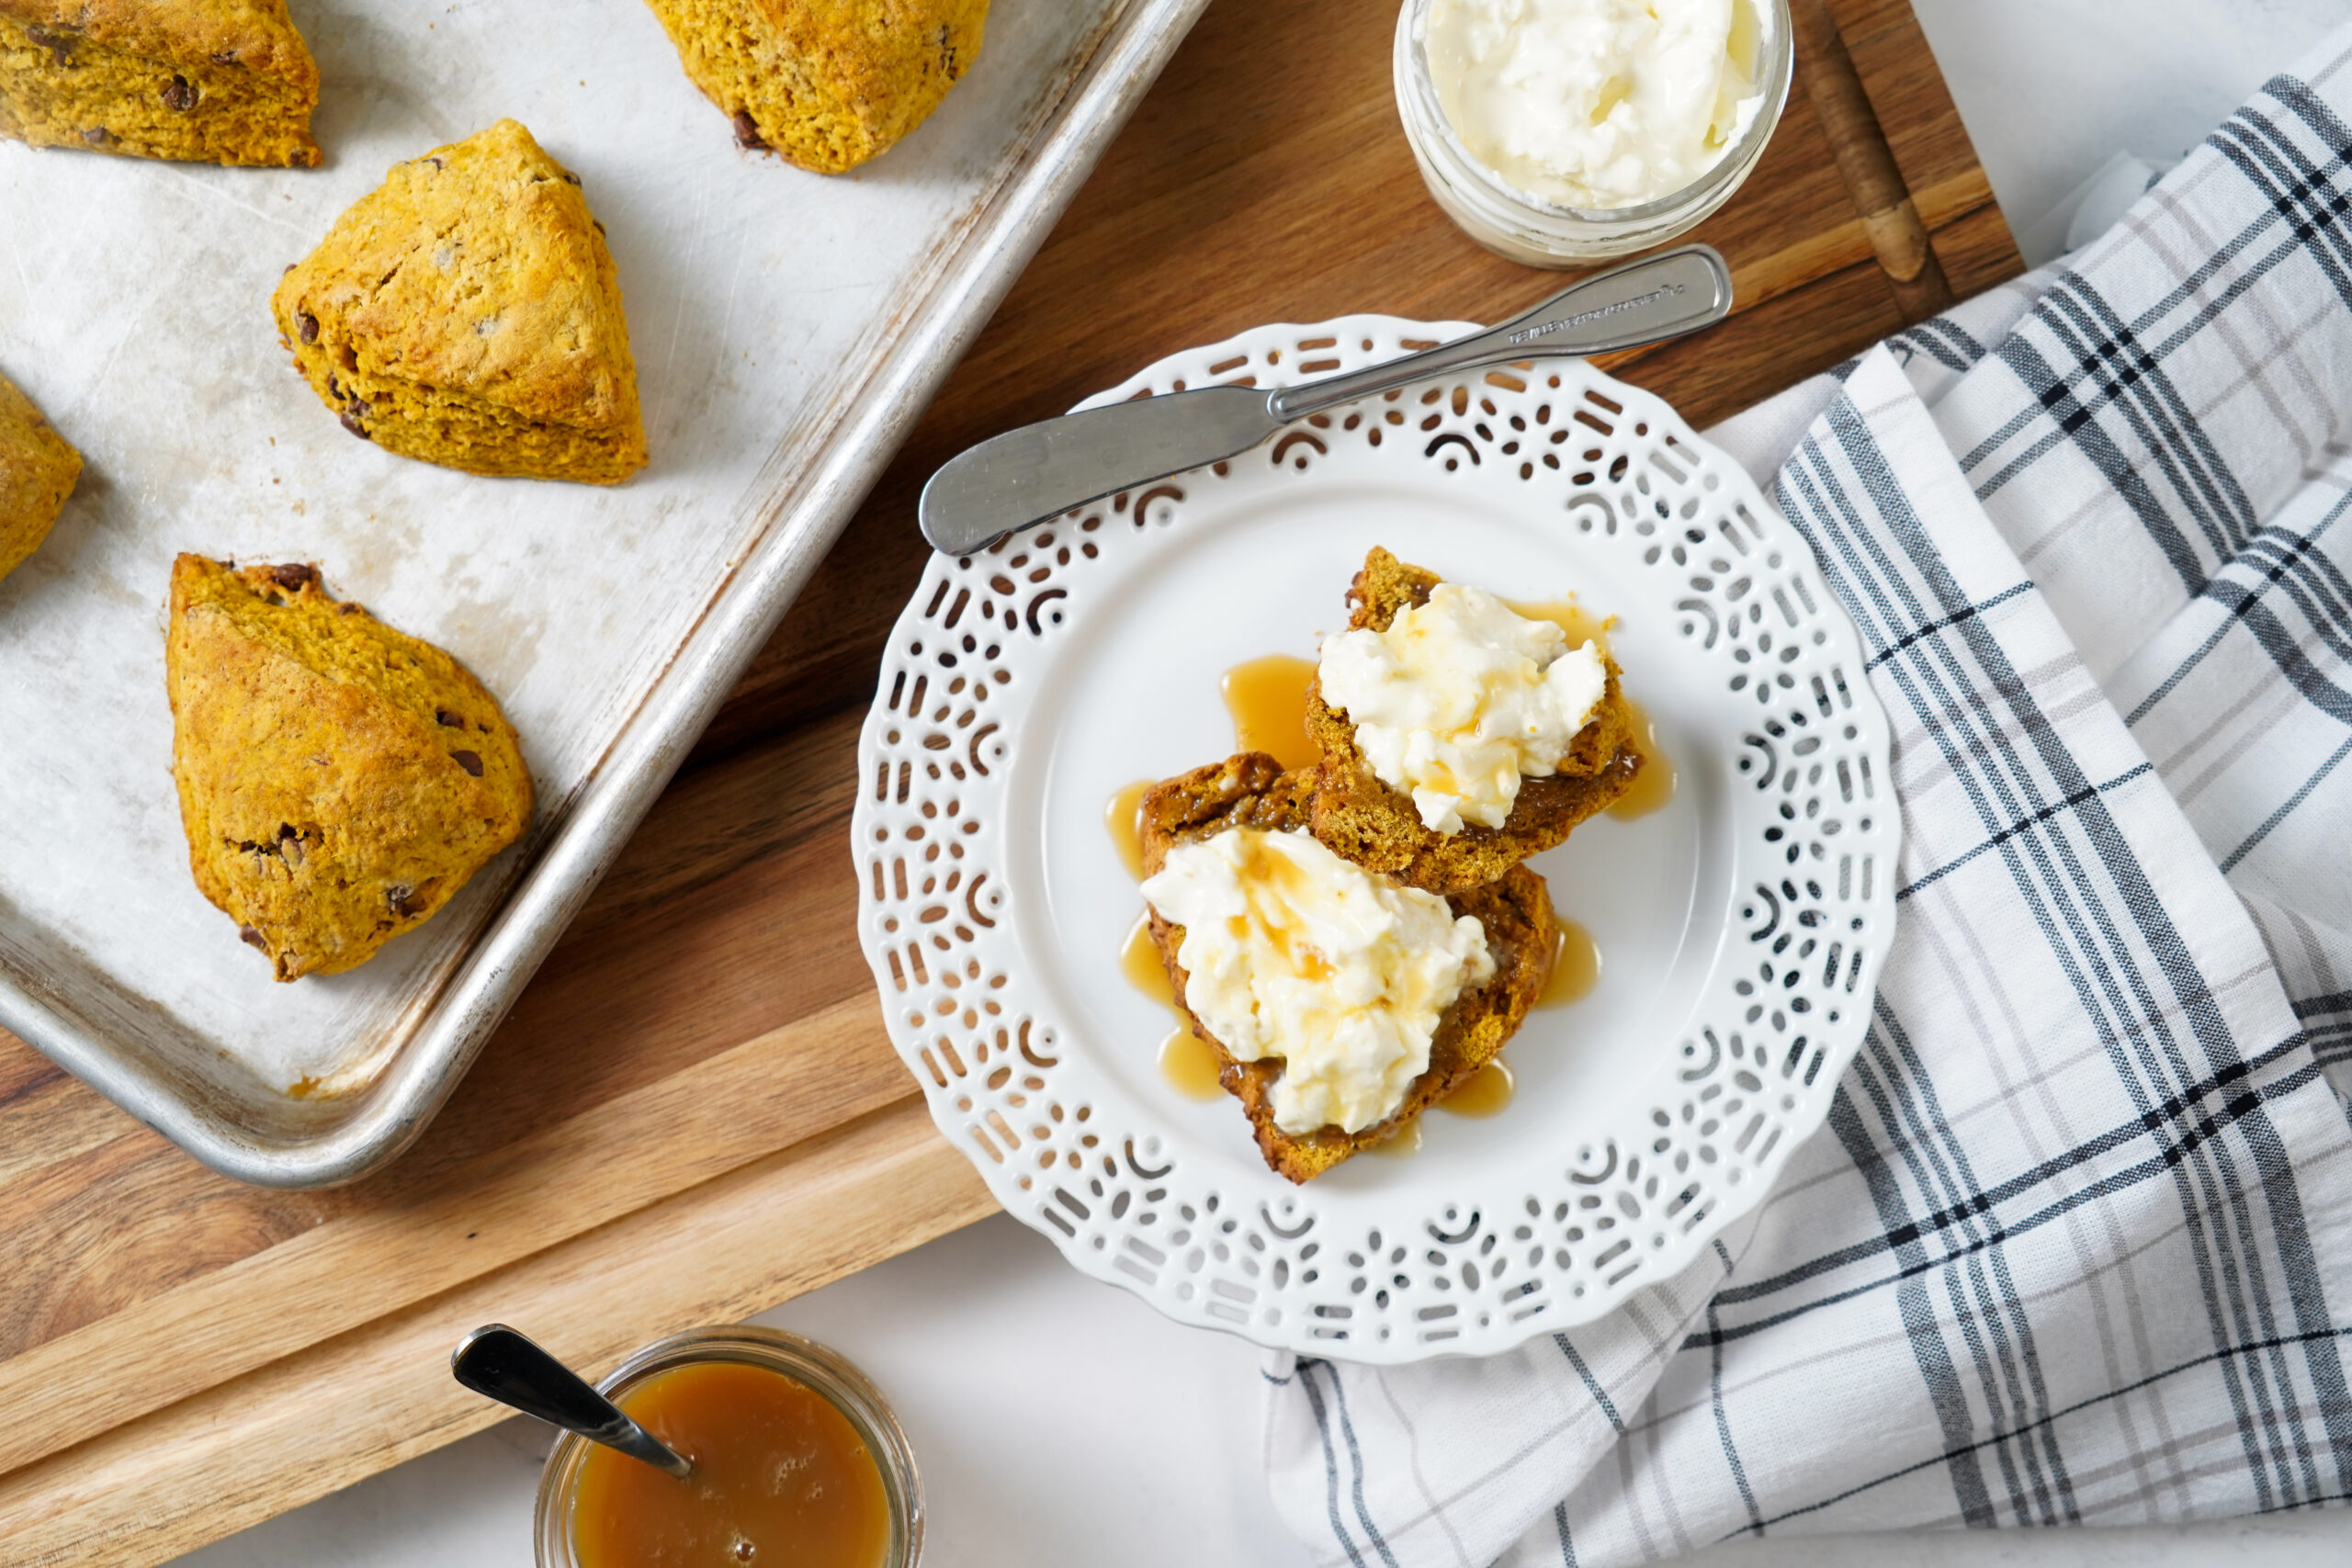 Pumpkin Chocolate Chip Scones with Clotted Cream